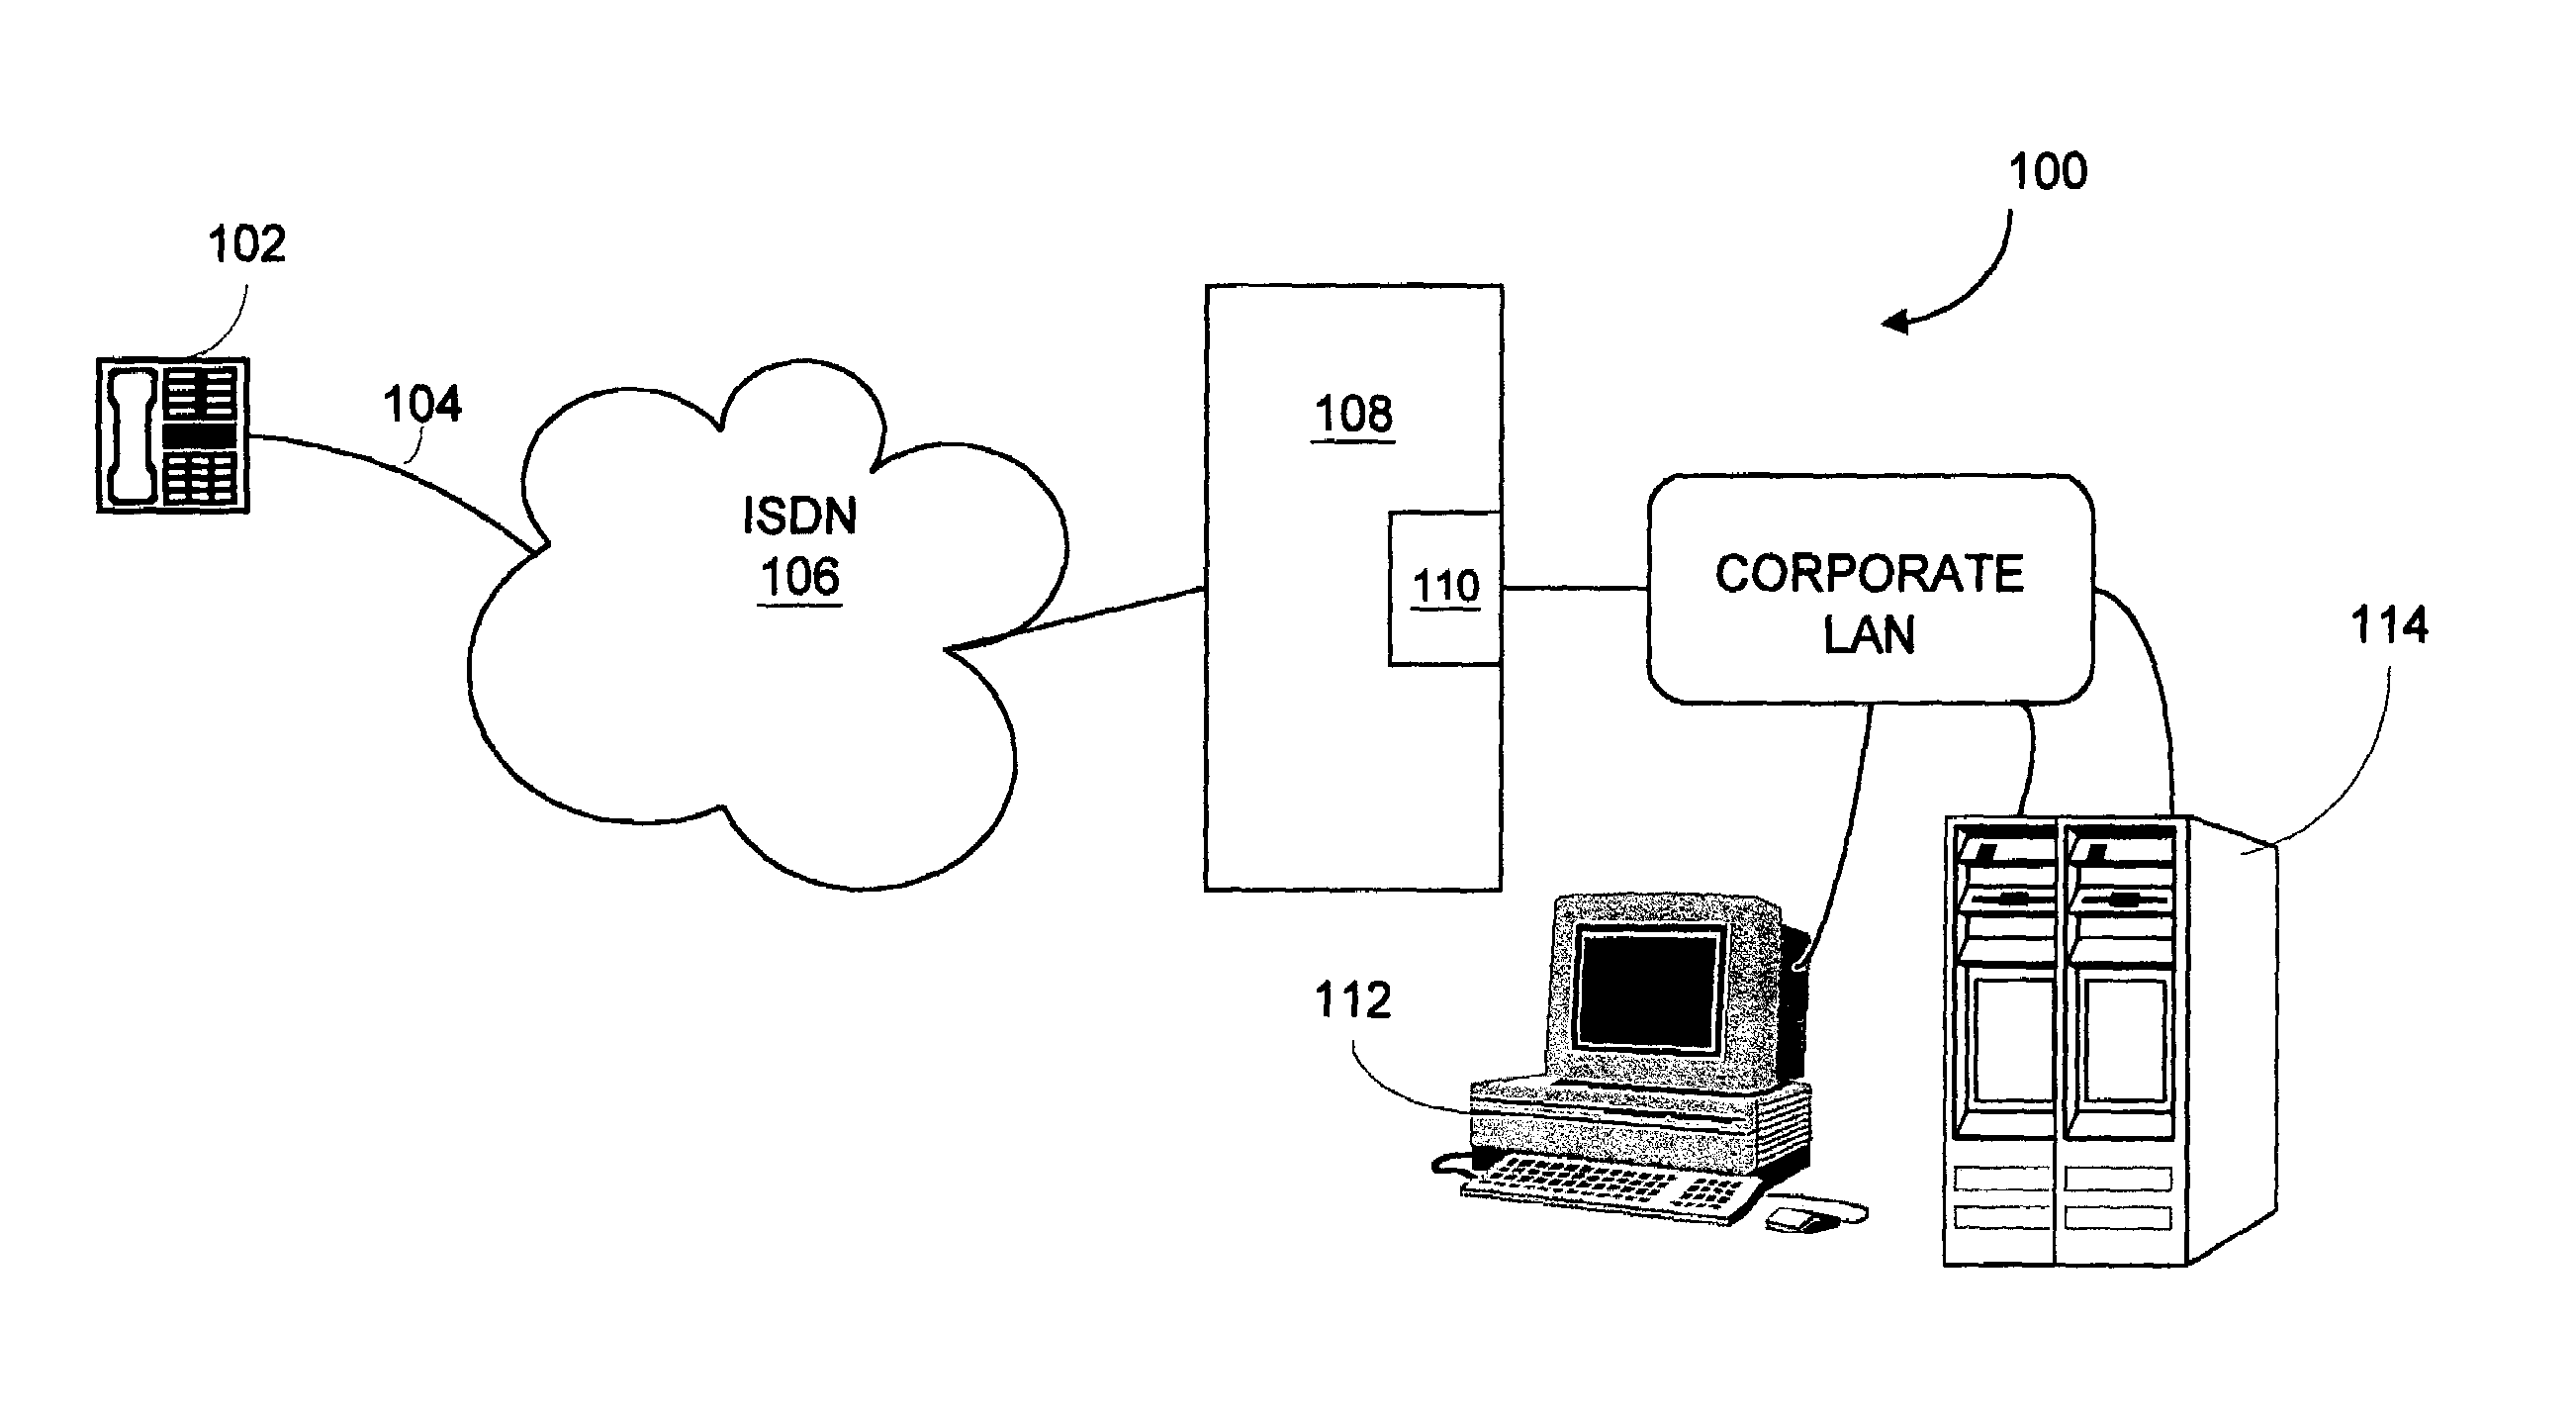 Method and apparatus for extending PBX features via the public network